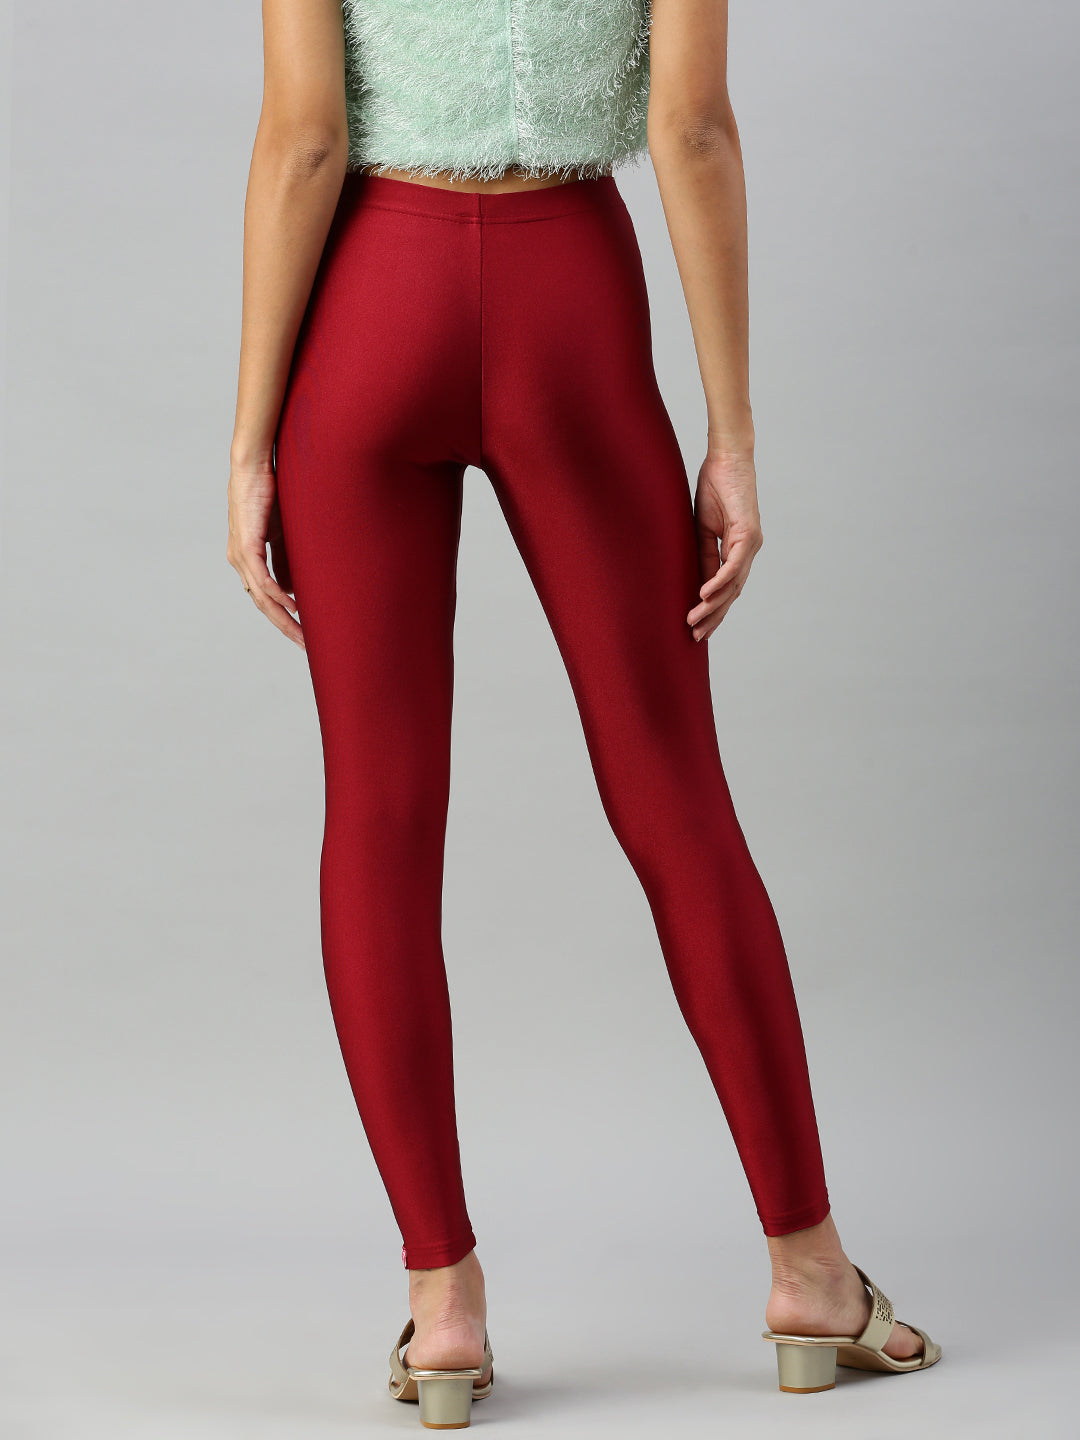 Prisma Shimmer Leggings in Frenchwine for a Chic Look